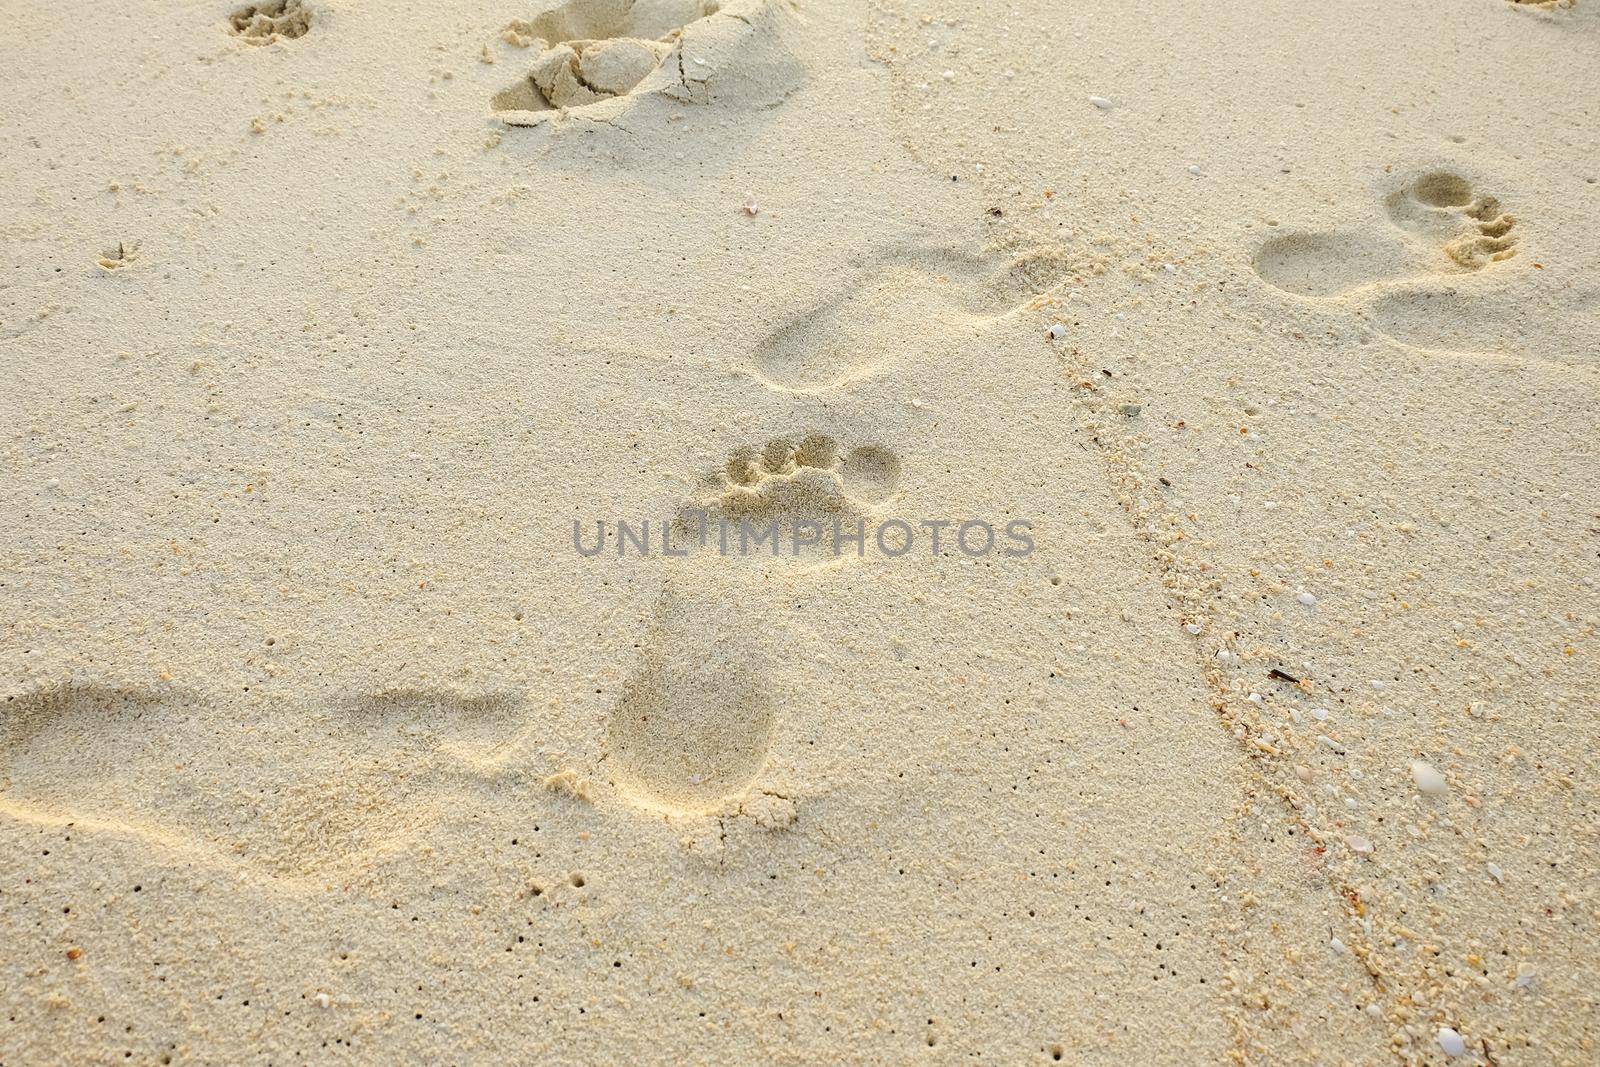 Footprints in wet sand close to sea in sunny day